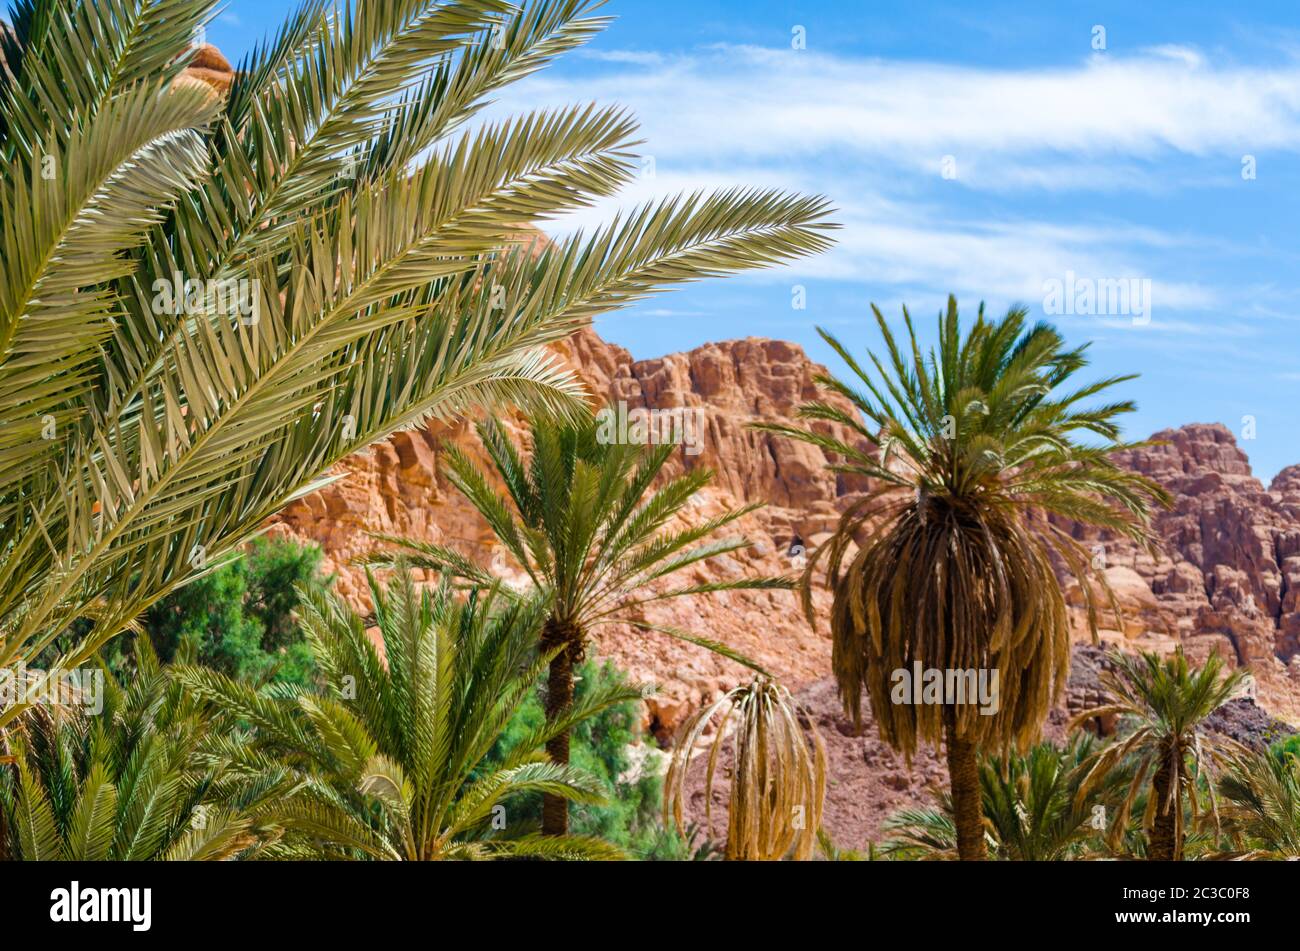 green palm trees on the background of mountains and blue sky with white clouds in Egypt Dahab South Stock Photo